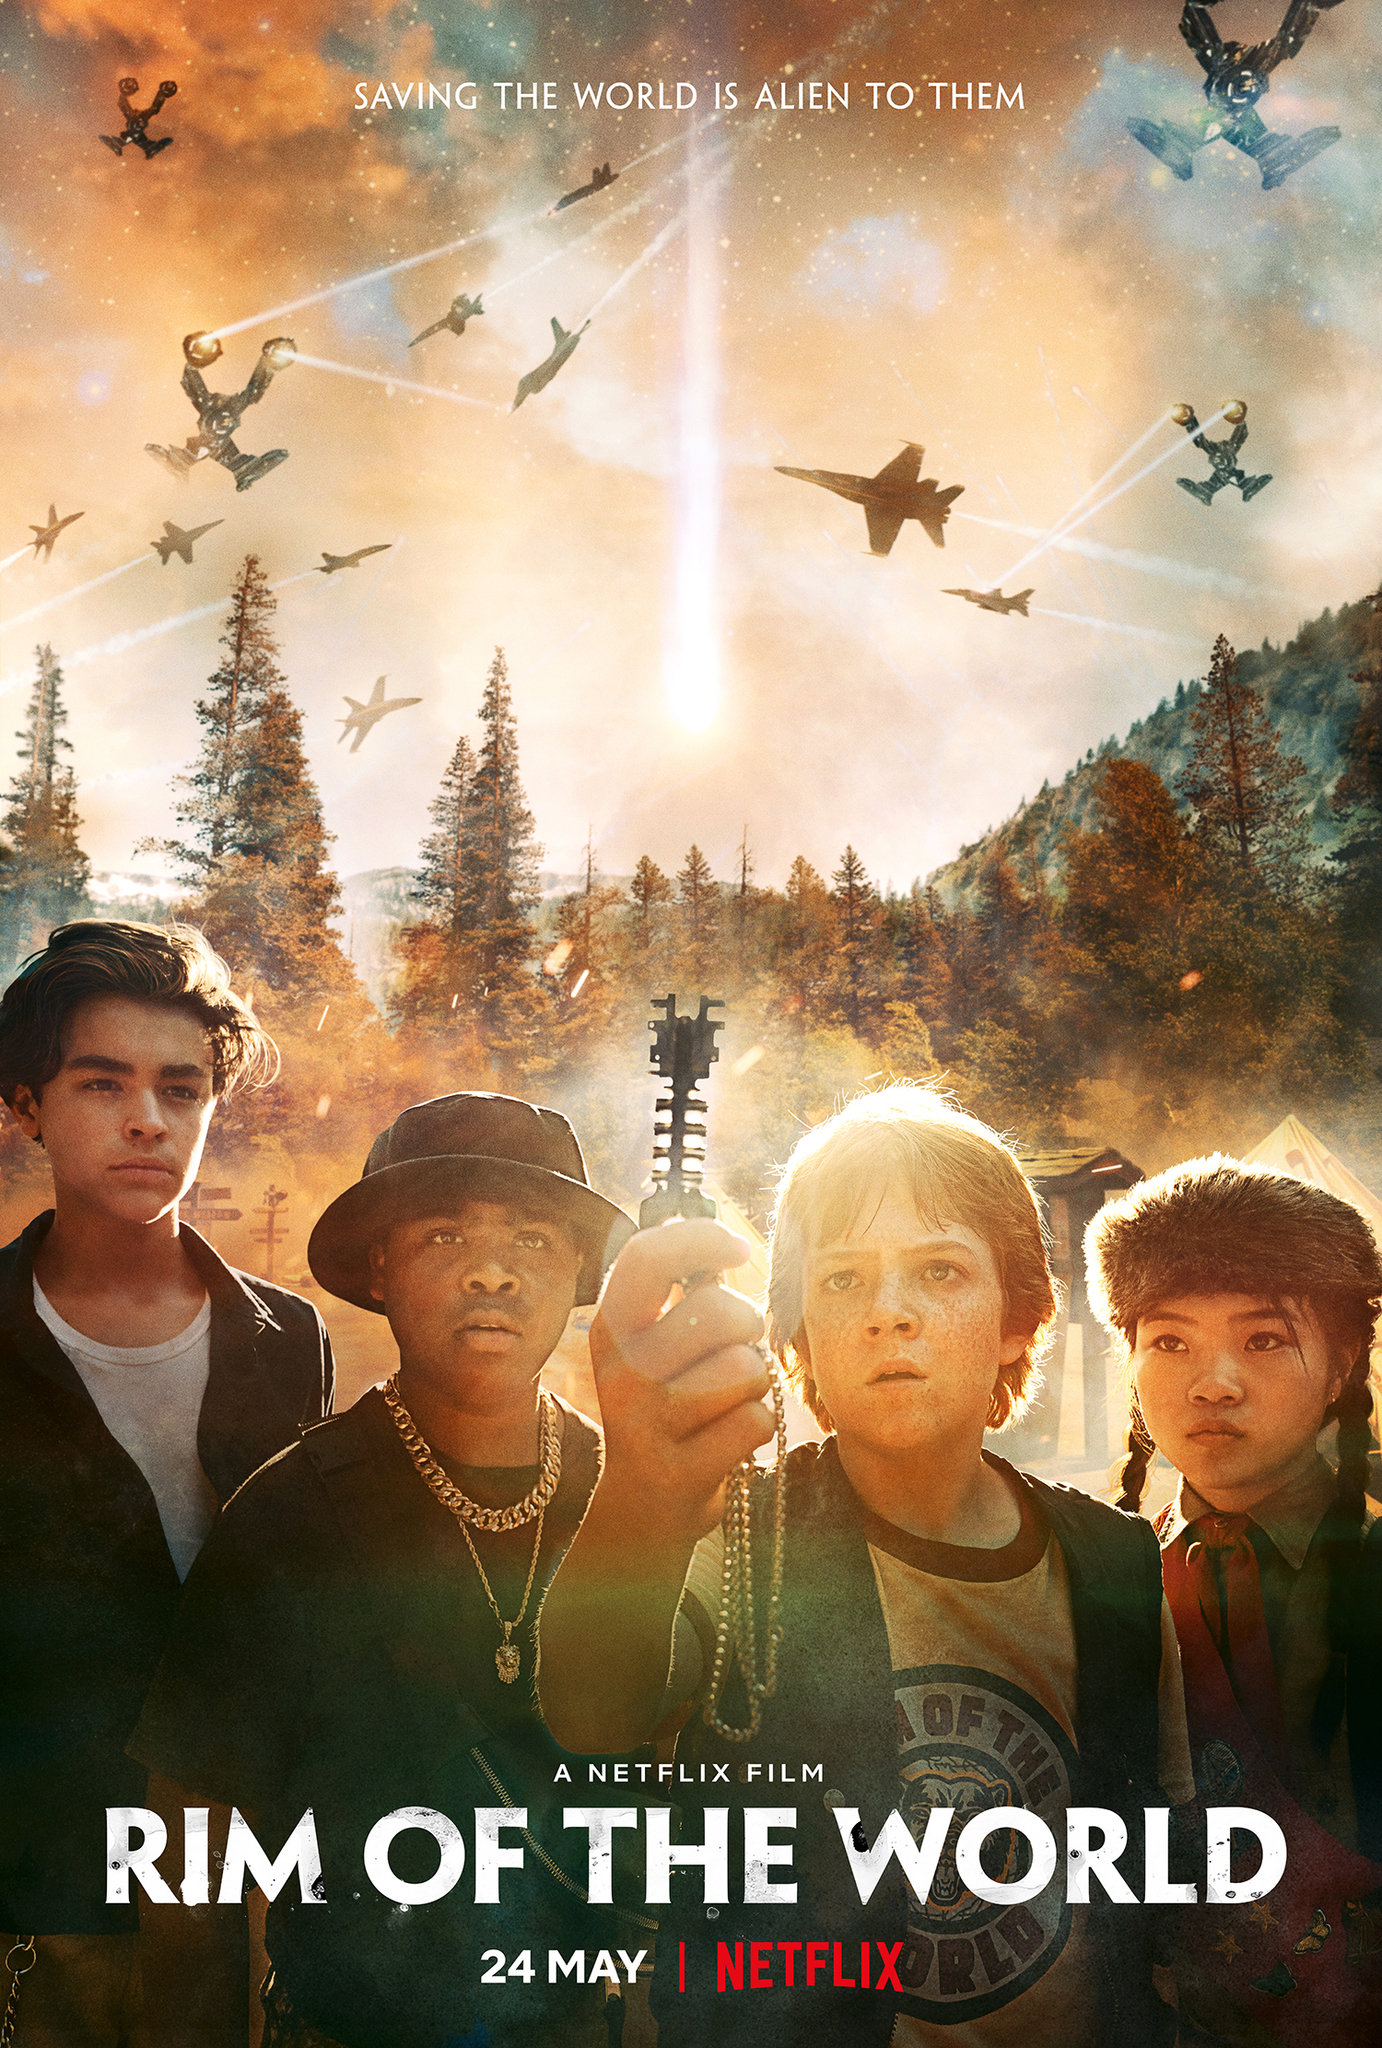 Summer camp has barely begun when aliens suddenly invade the planet. In a campground once teeming with people, four misfit teens are unexpectedly entrusted with a key that carries the secret to stopping the invasion.